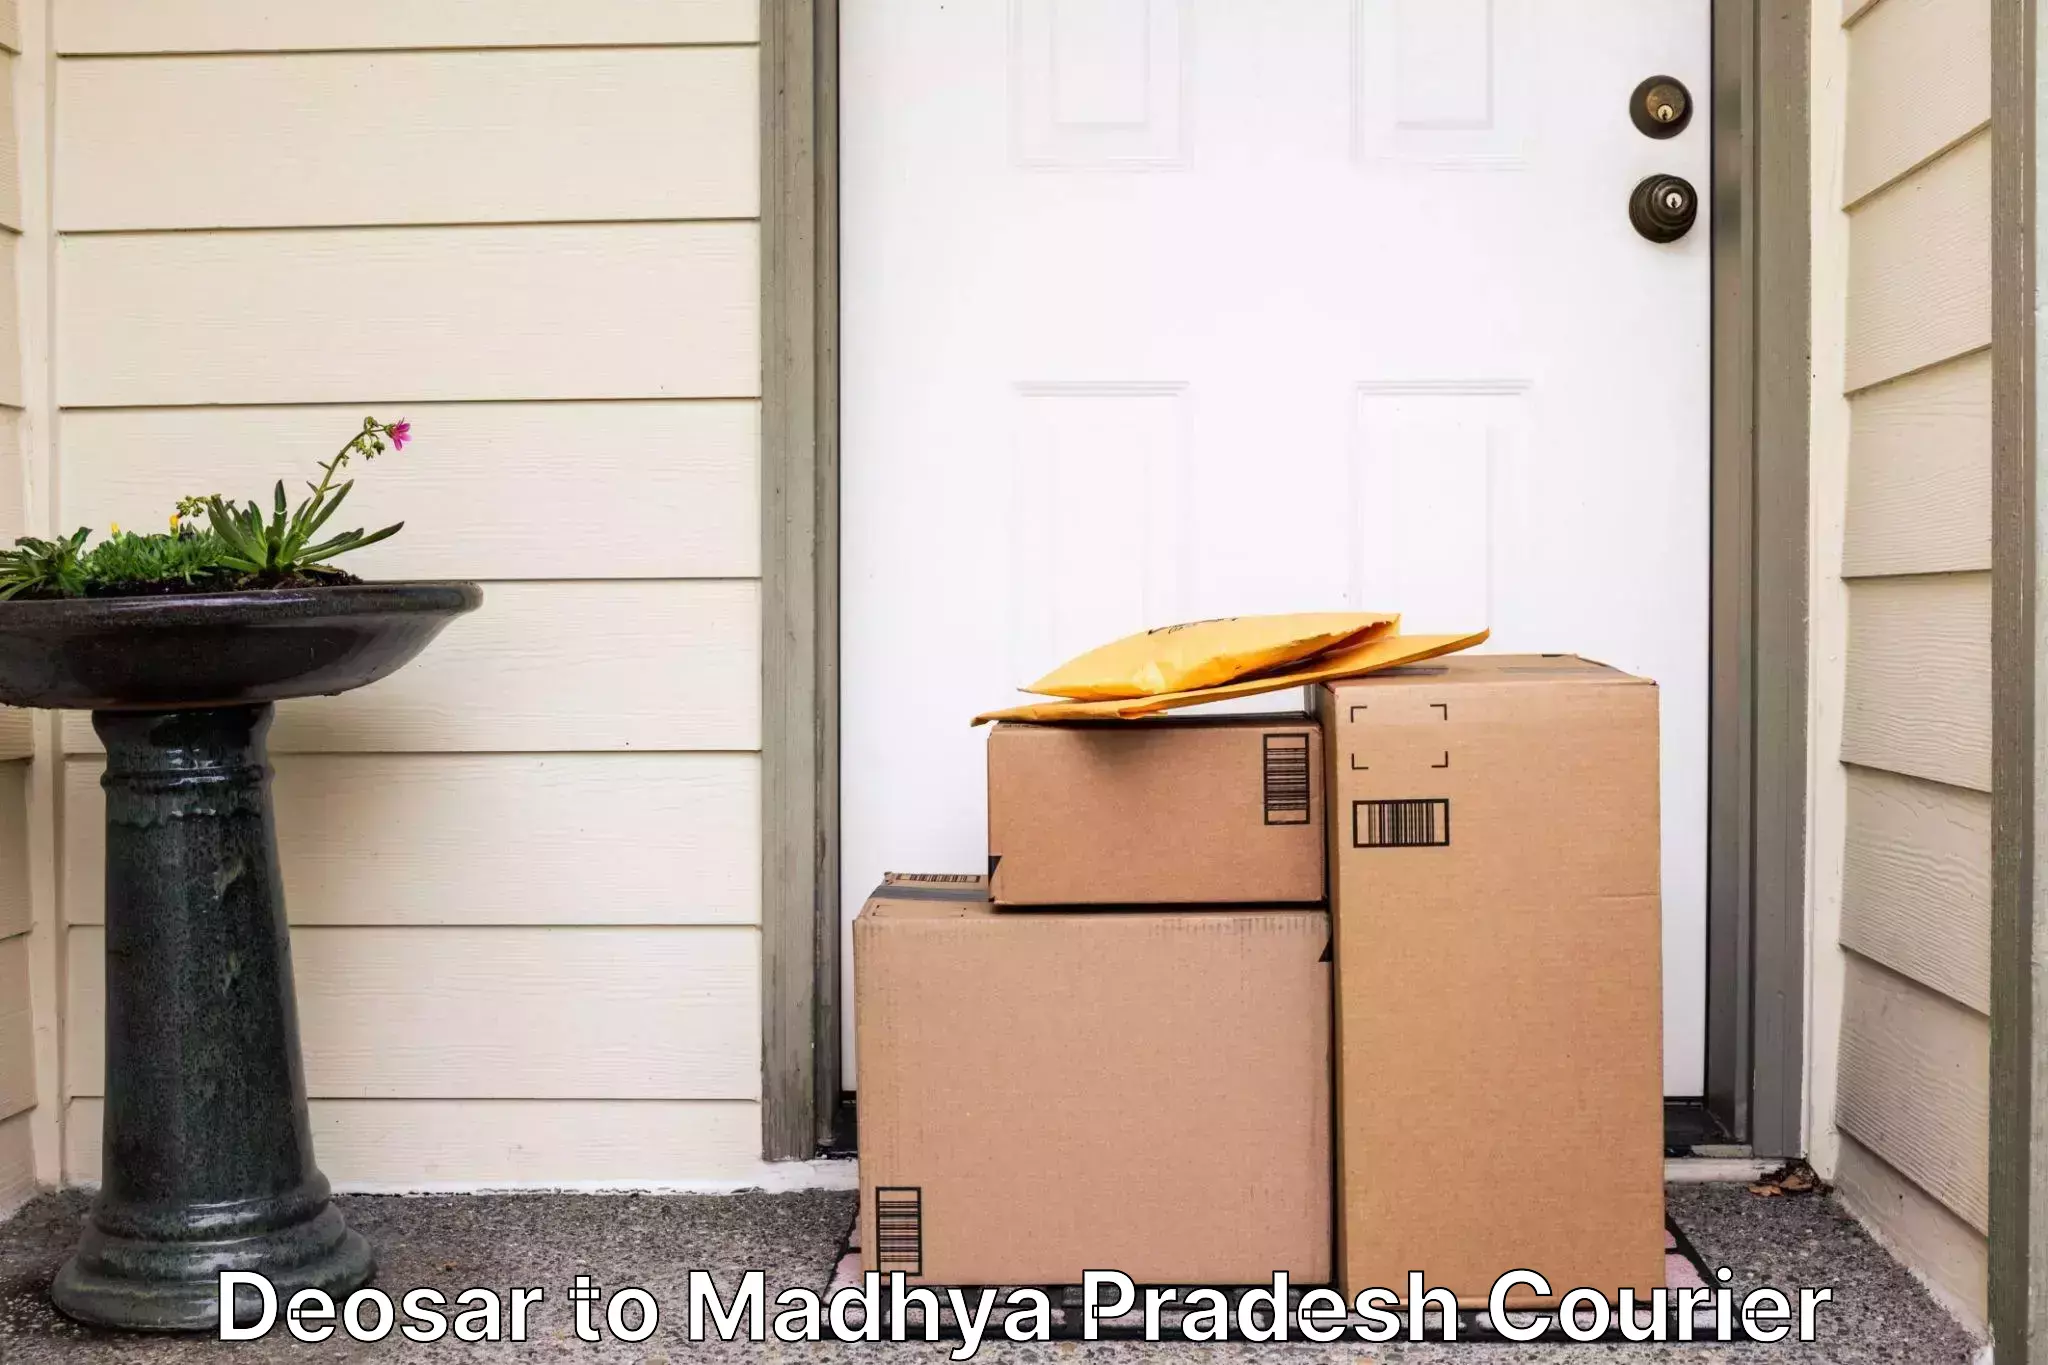 Nationwide shipping services Deosar to Madhya Pradesh